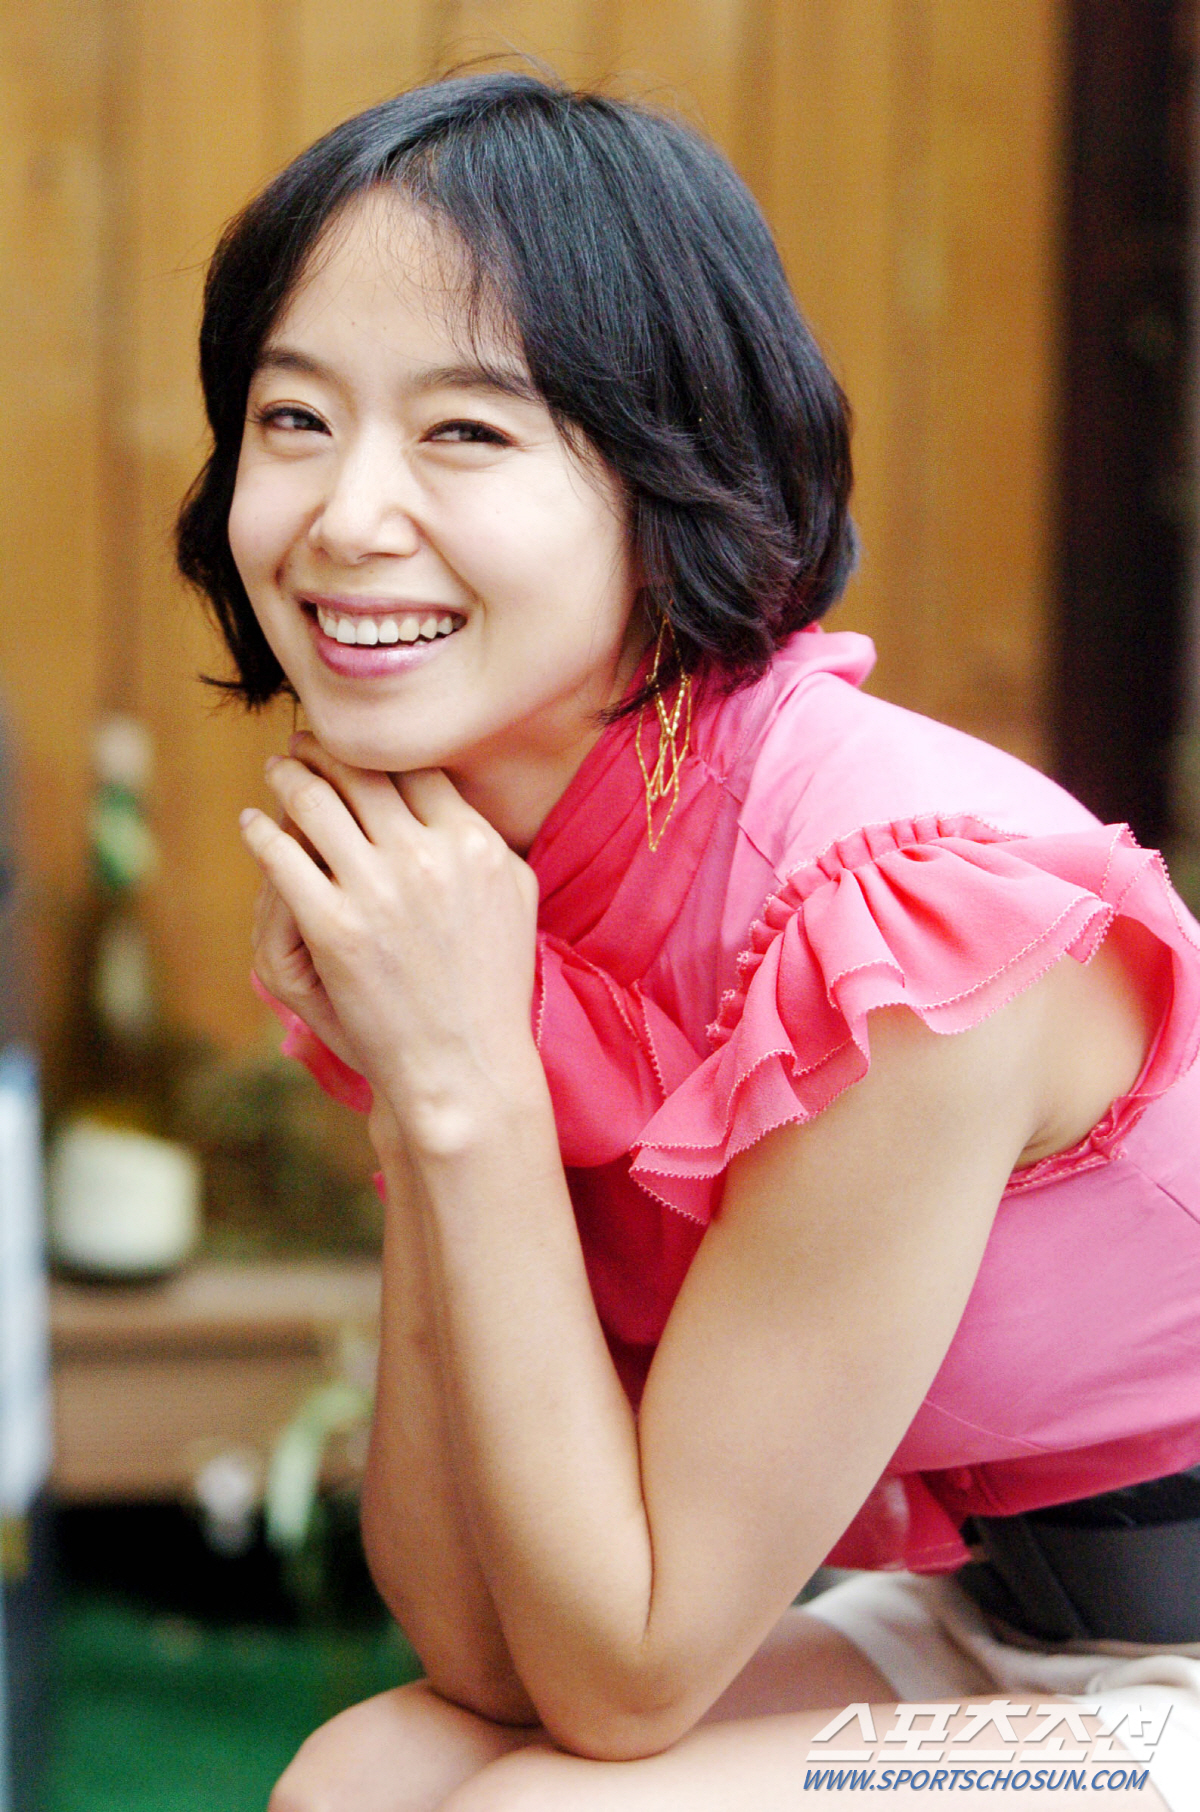 On the 13th, a production presentation of the movie Beasts Wanting to Hold a Jeep was held at Megabox in Seongsu-dong, Seoul.Actor Jeon Do-yeon and Jung Woo-sung, who represent South Korea, caught sight of each other for the first time since debut.Queen of Cannes Jeon Do-yeon began acting in earnest in the 1992 TV drama Our Heaven after announcing his face as an advertising model in 1990.She played a big role in TV CRTs such as General Hospital in 1994 and Young Mans Sunji in 1995. She showed her charm in the first movie Connect in 1997 and was recognized as a female actor.Jung Woo-sung, who became a youth star by capturing her emotions from the beginning with her superior mask and tall height, announced her face as a CF model in the early 90s and made a surprise debut in the 1994 movie GumihoJeon Do-yeon and Jung Woo-sung, who have been the best actors representing South Korea for nearly 30 years since debut.